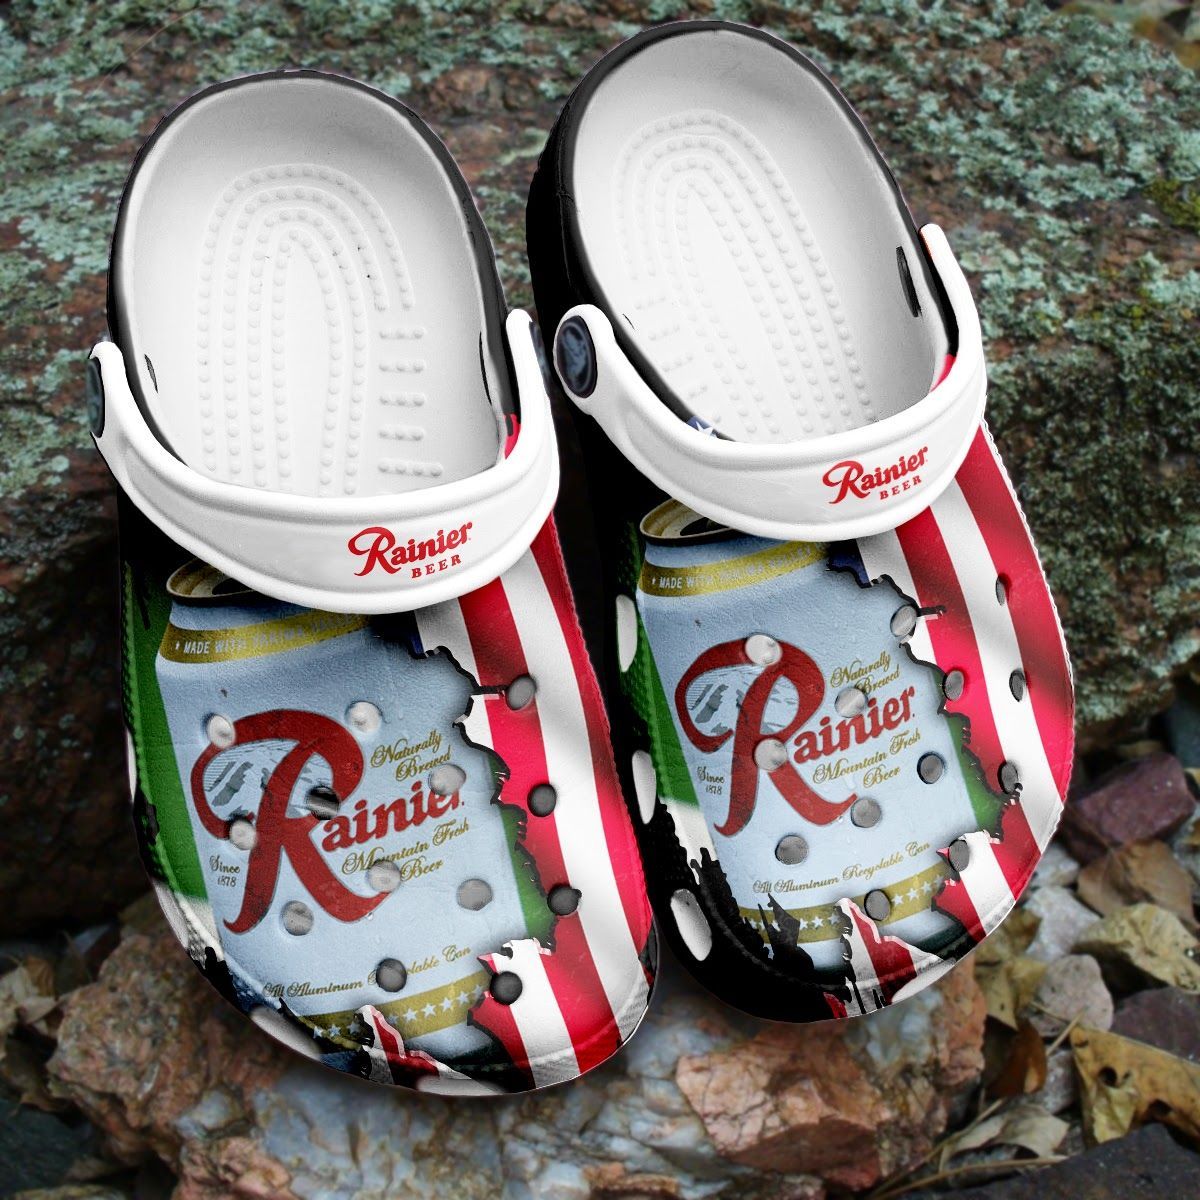 If you'd like to purchase a pair of Crocband Clogs, be sure to check out the official website. 96